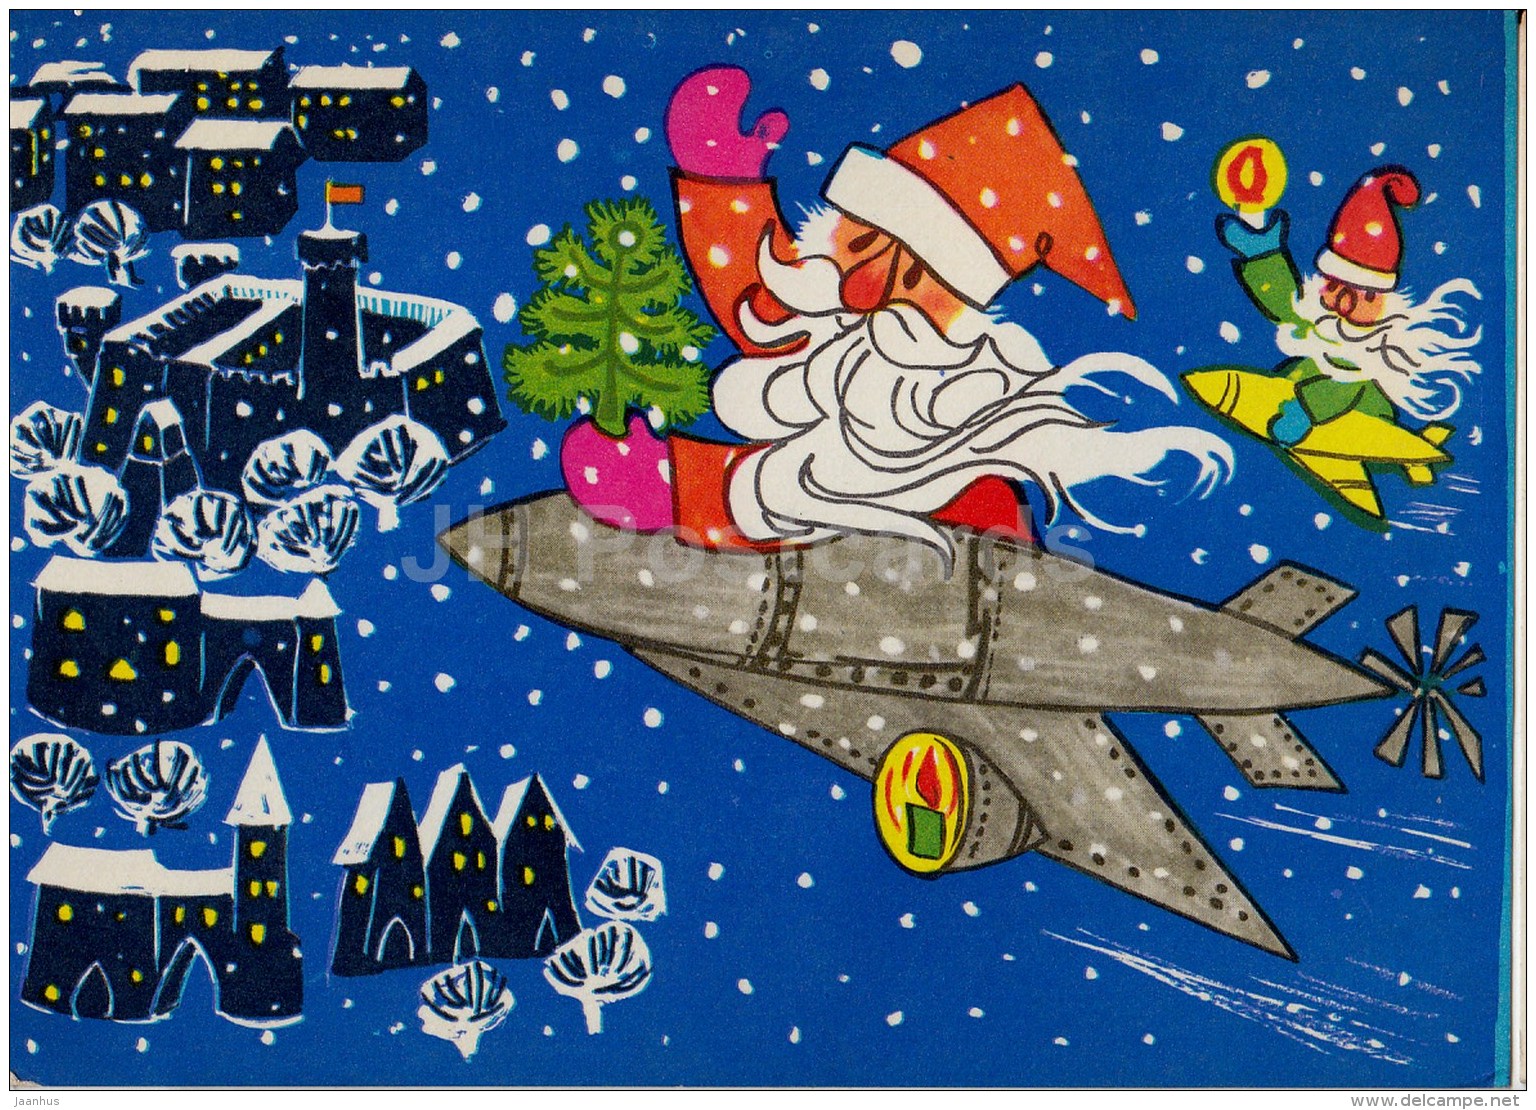 New Year Greeting Card by S. Kalev - Santa Claus - airplane - 1973 - Estonia USSR - used - JH Postcards